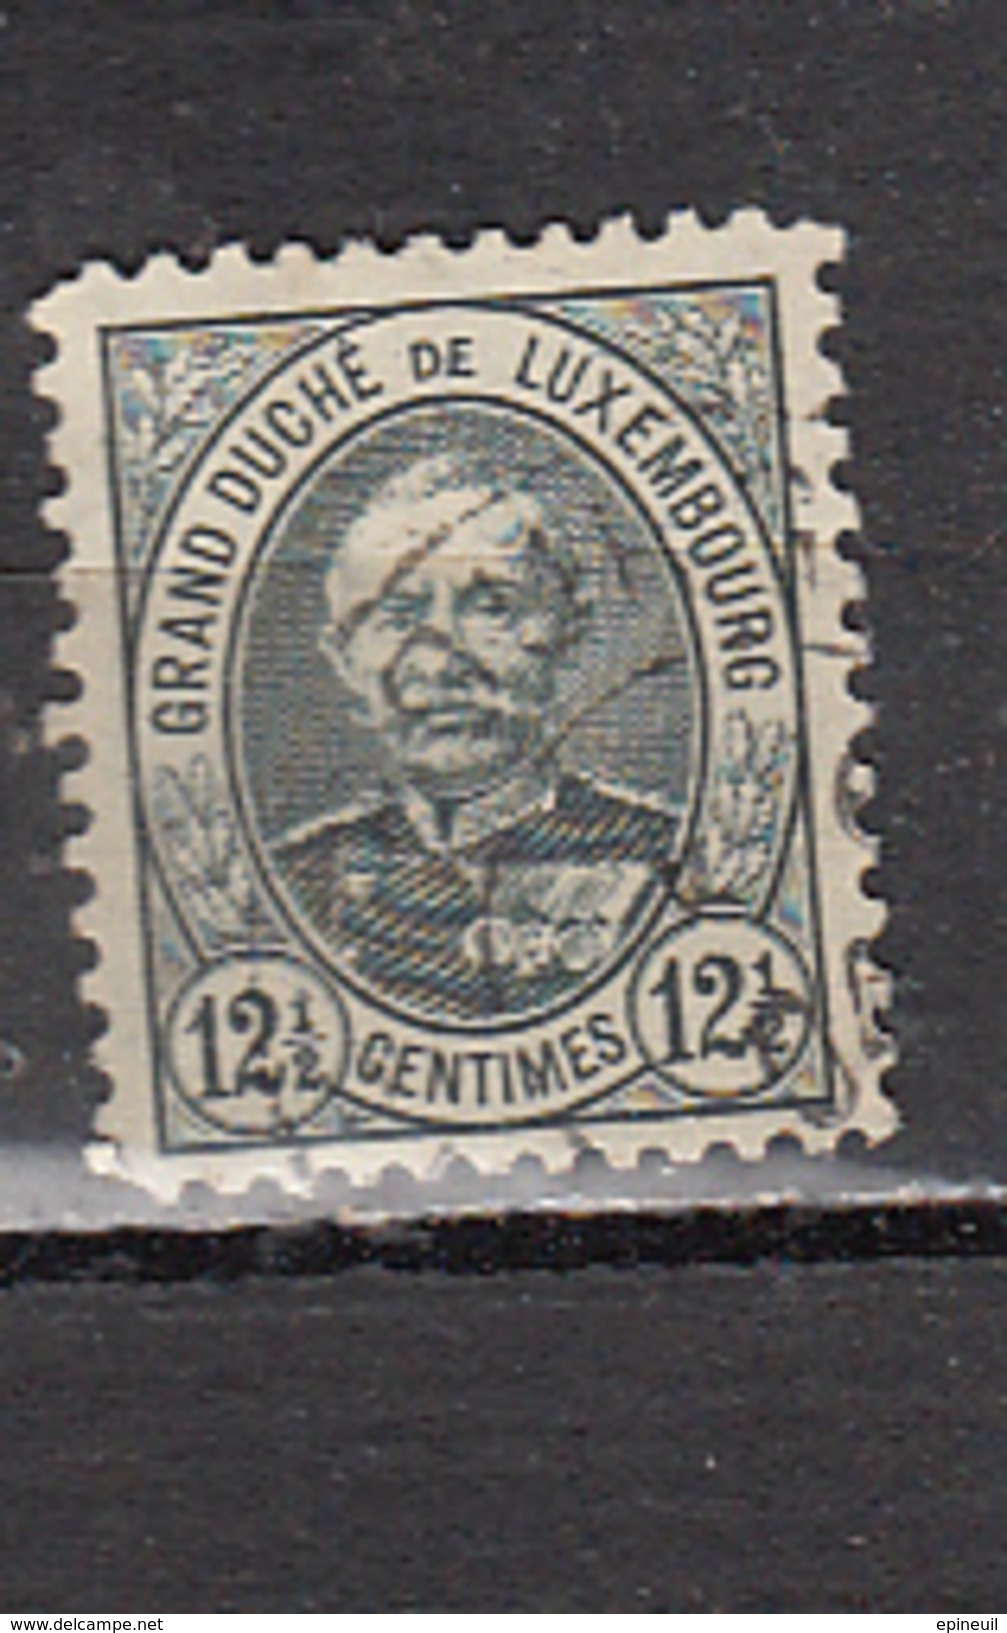 LUXEMBOURG ° YT N°  60 - 1891 Adolphe De Face